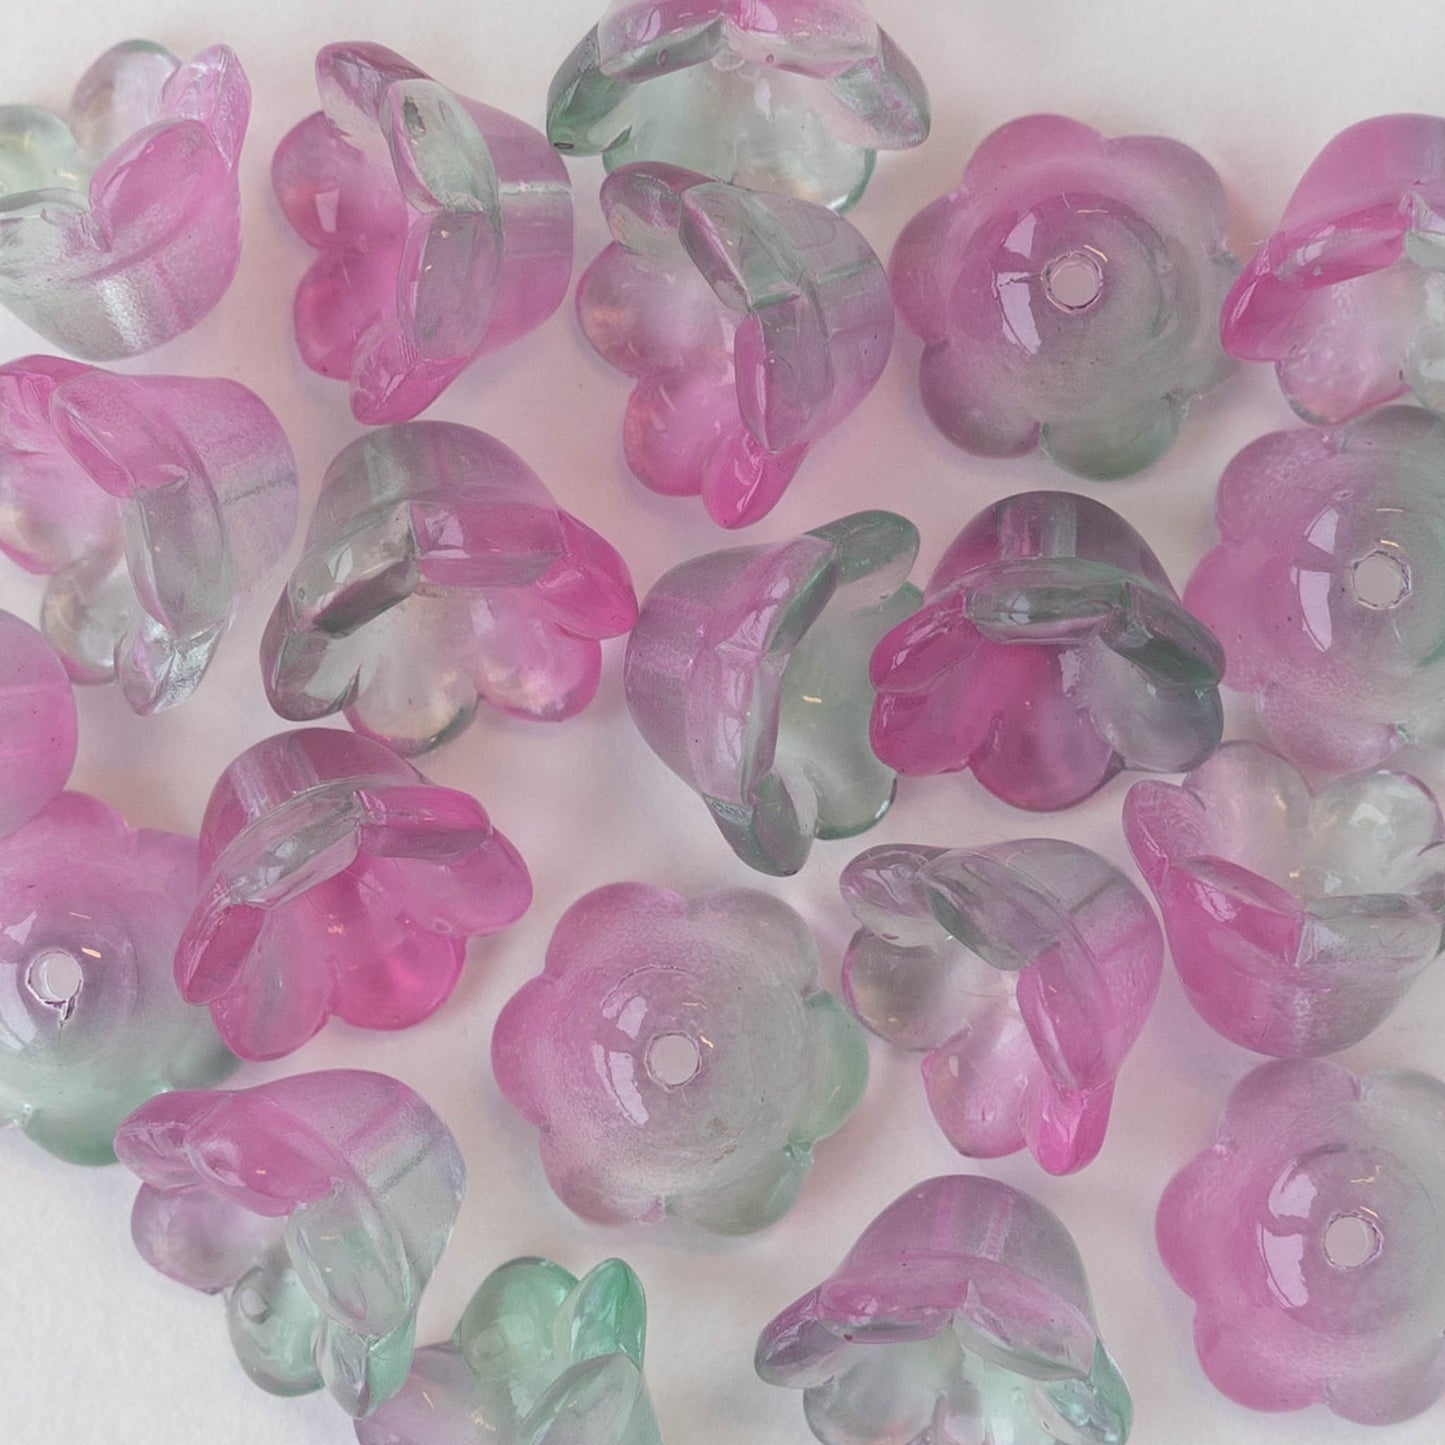 Load image into Gallery viewer, 7x12mm Flower Beads - Tourmaline Mix - 30 Beads
